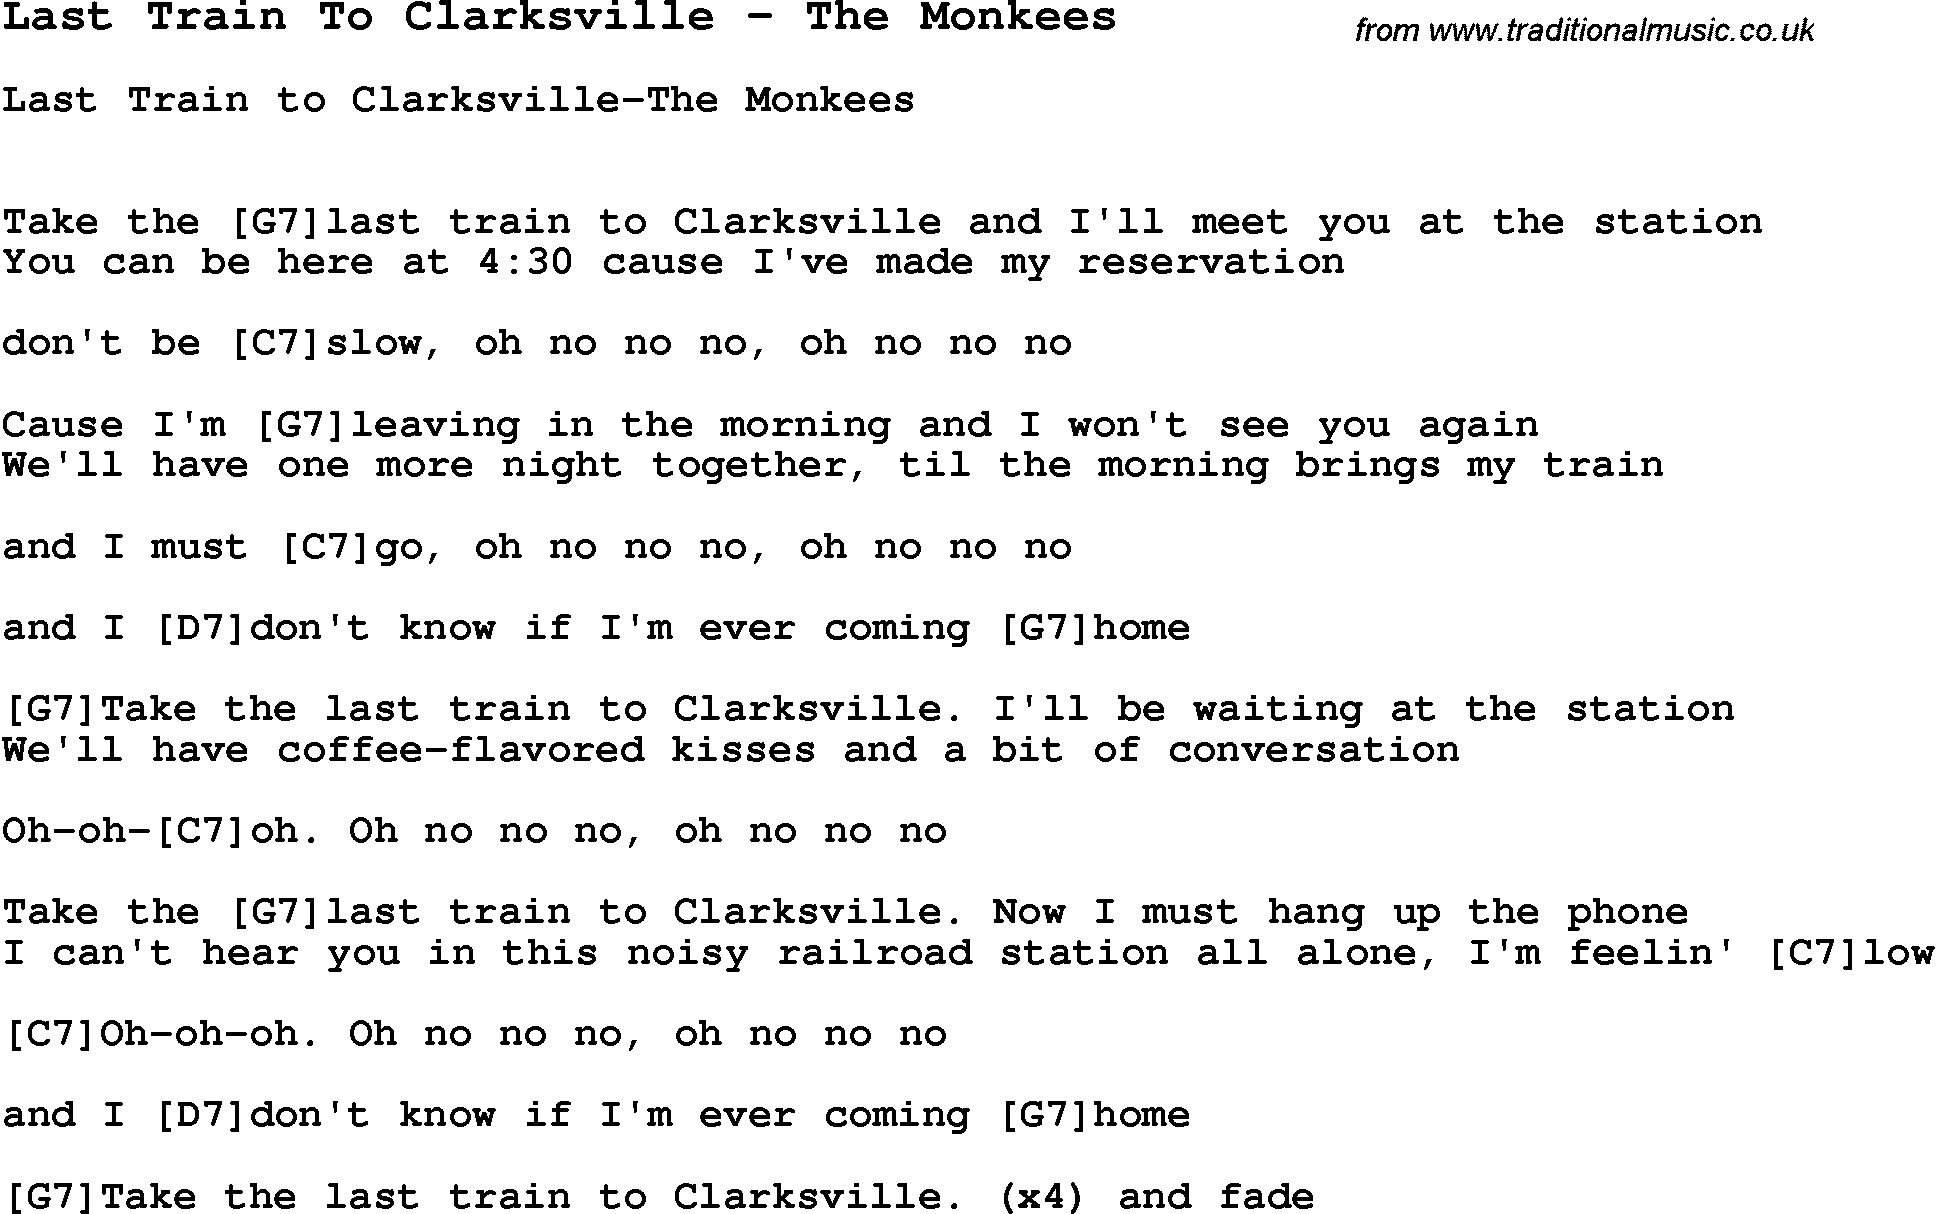 Song Last Train To Clarksville by The Monkees, with lyrics for vocal performance and accompaniment chords for Ukulele, Guitar Banjo etc.